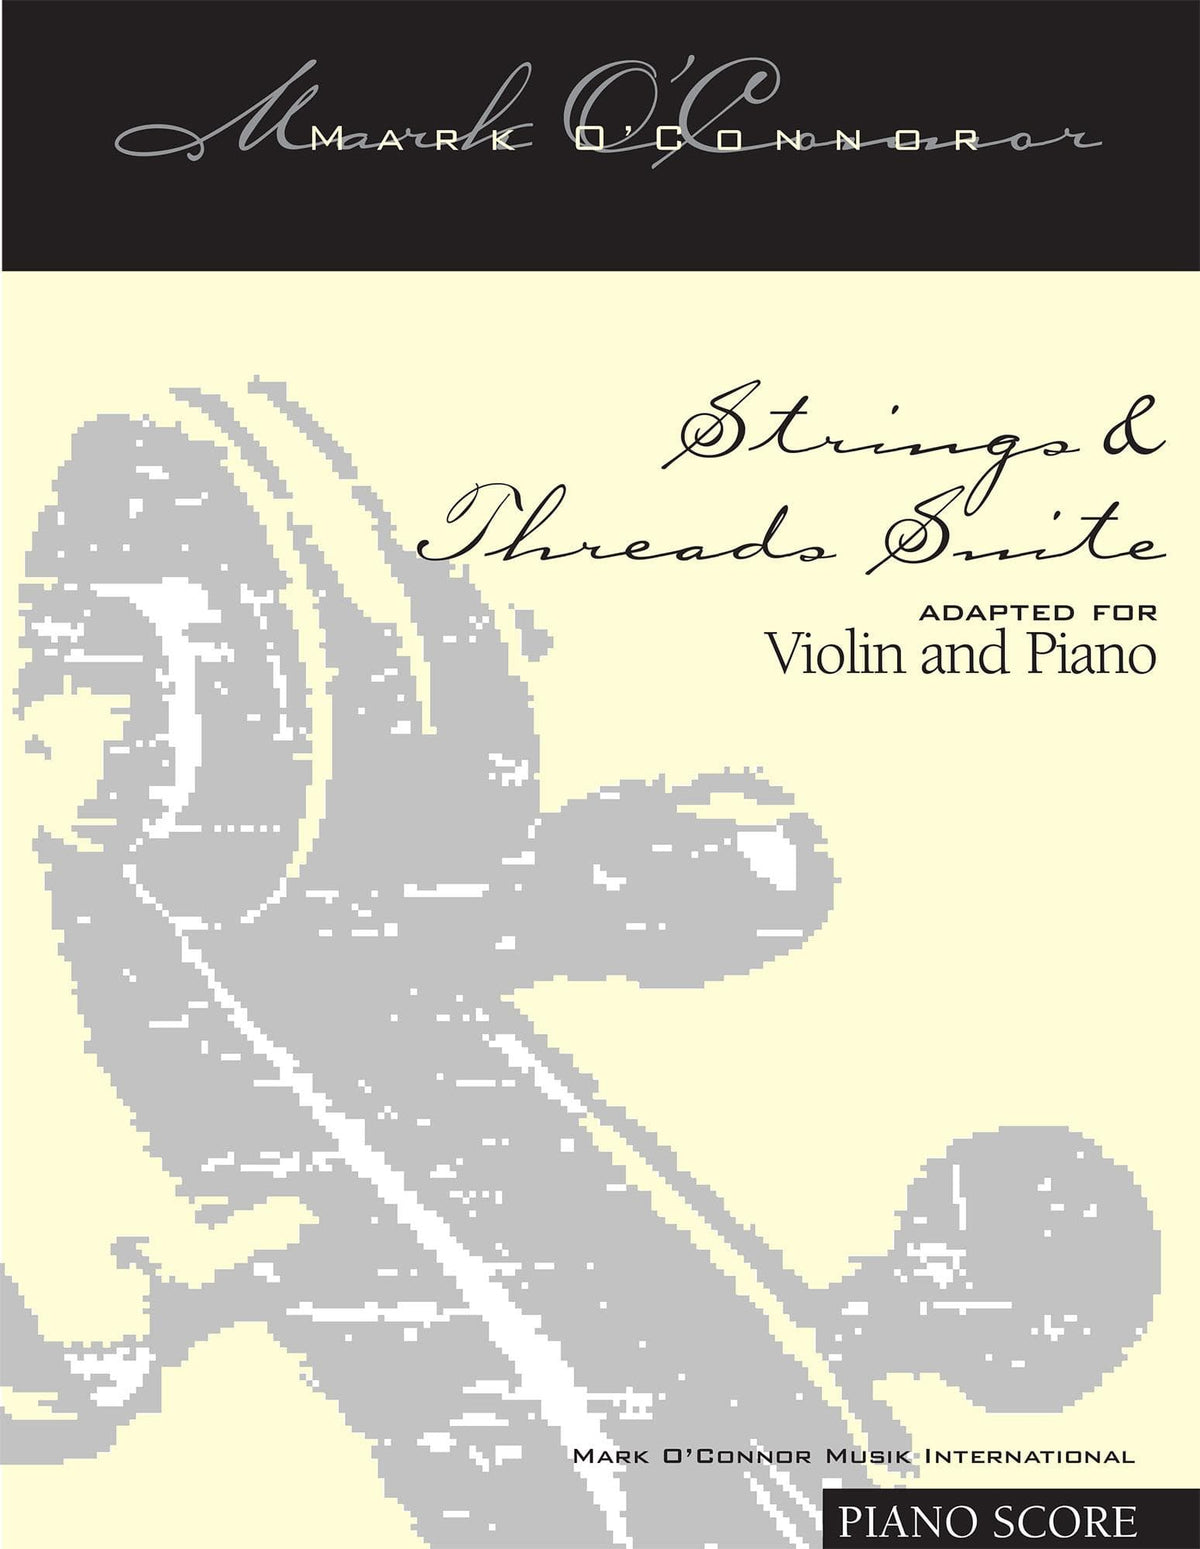 O'Connor, Mark - Strings & Threads Suite for Violin and Piano - Piano Score - Digital Download